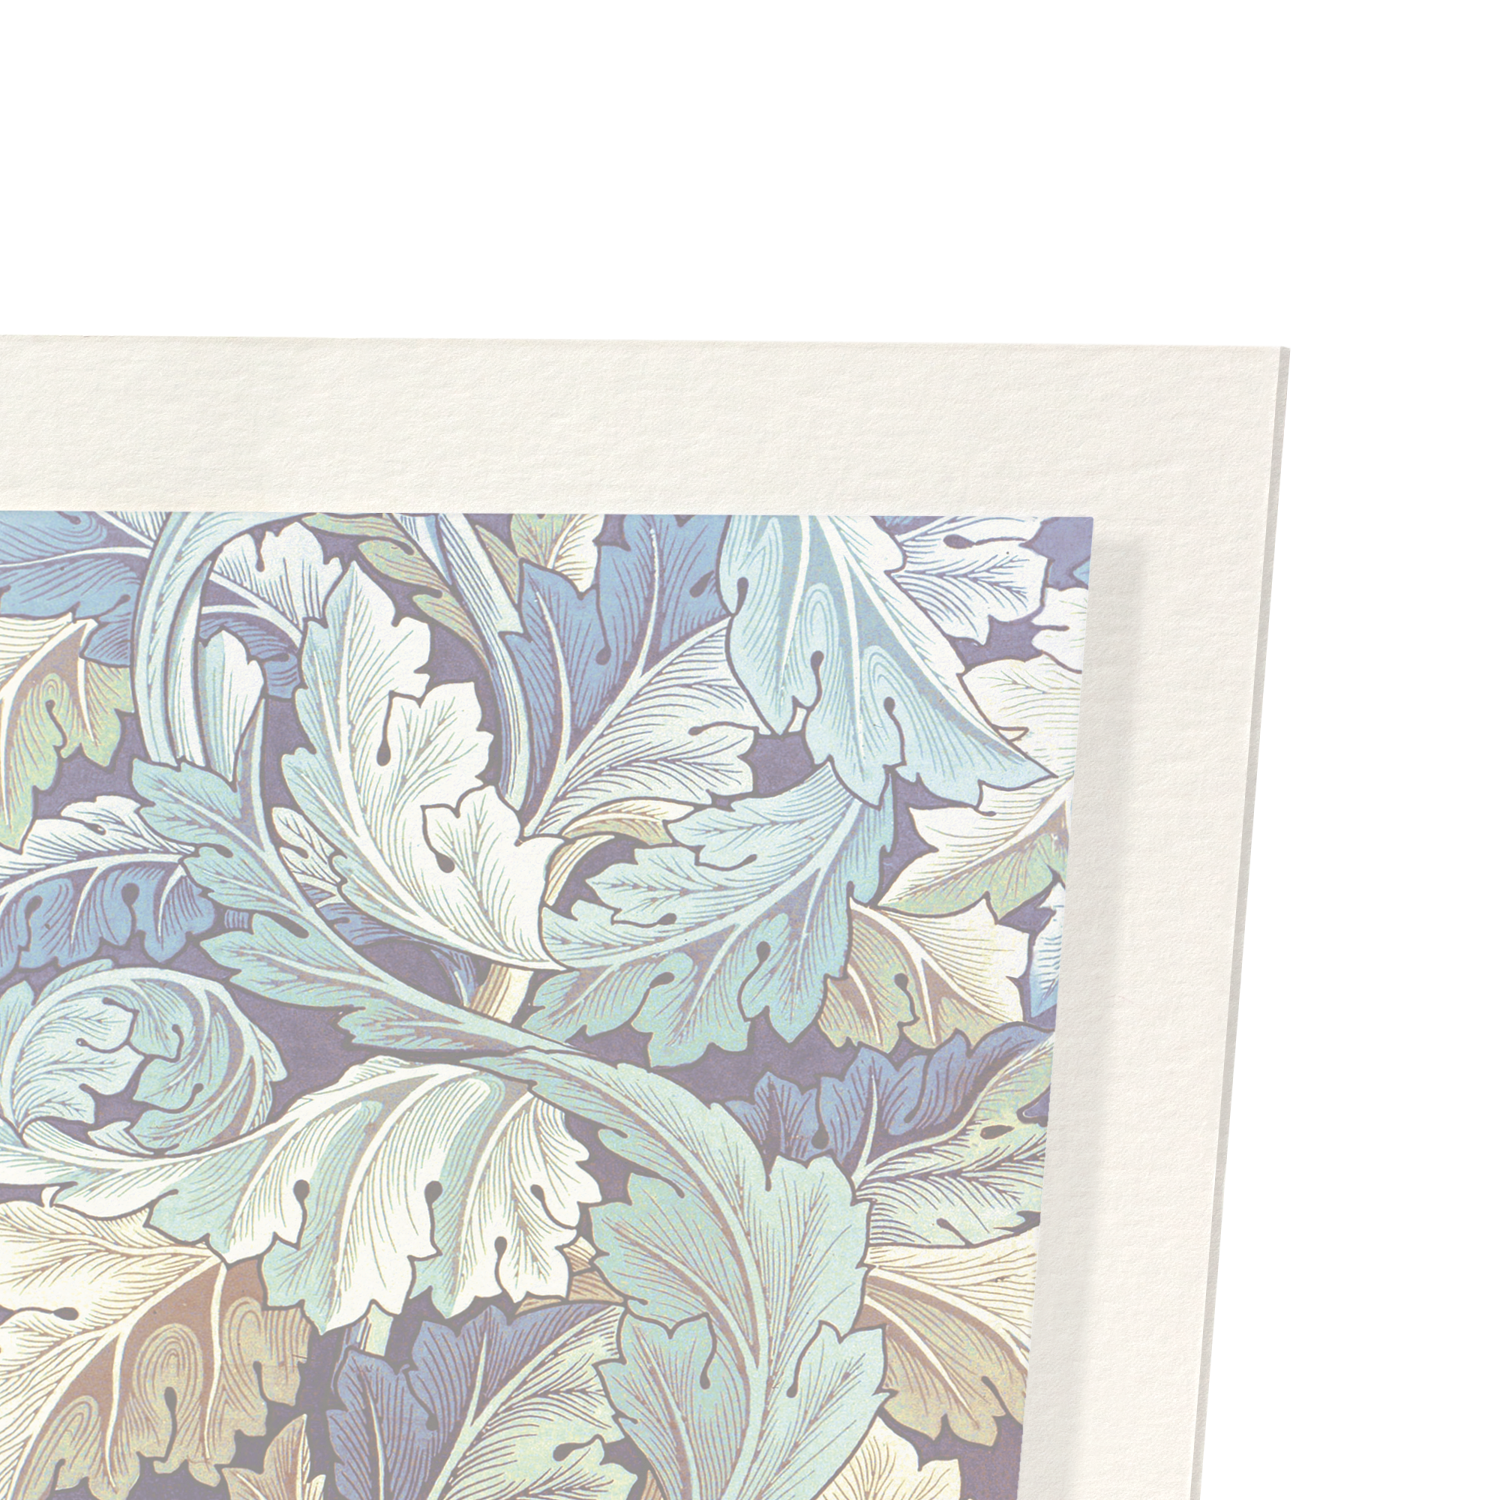 BEAUTY AND NATURE BY WILLIAM MORRIS: Pattern Art Print